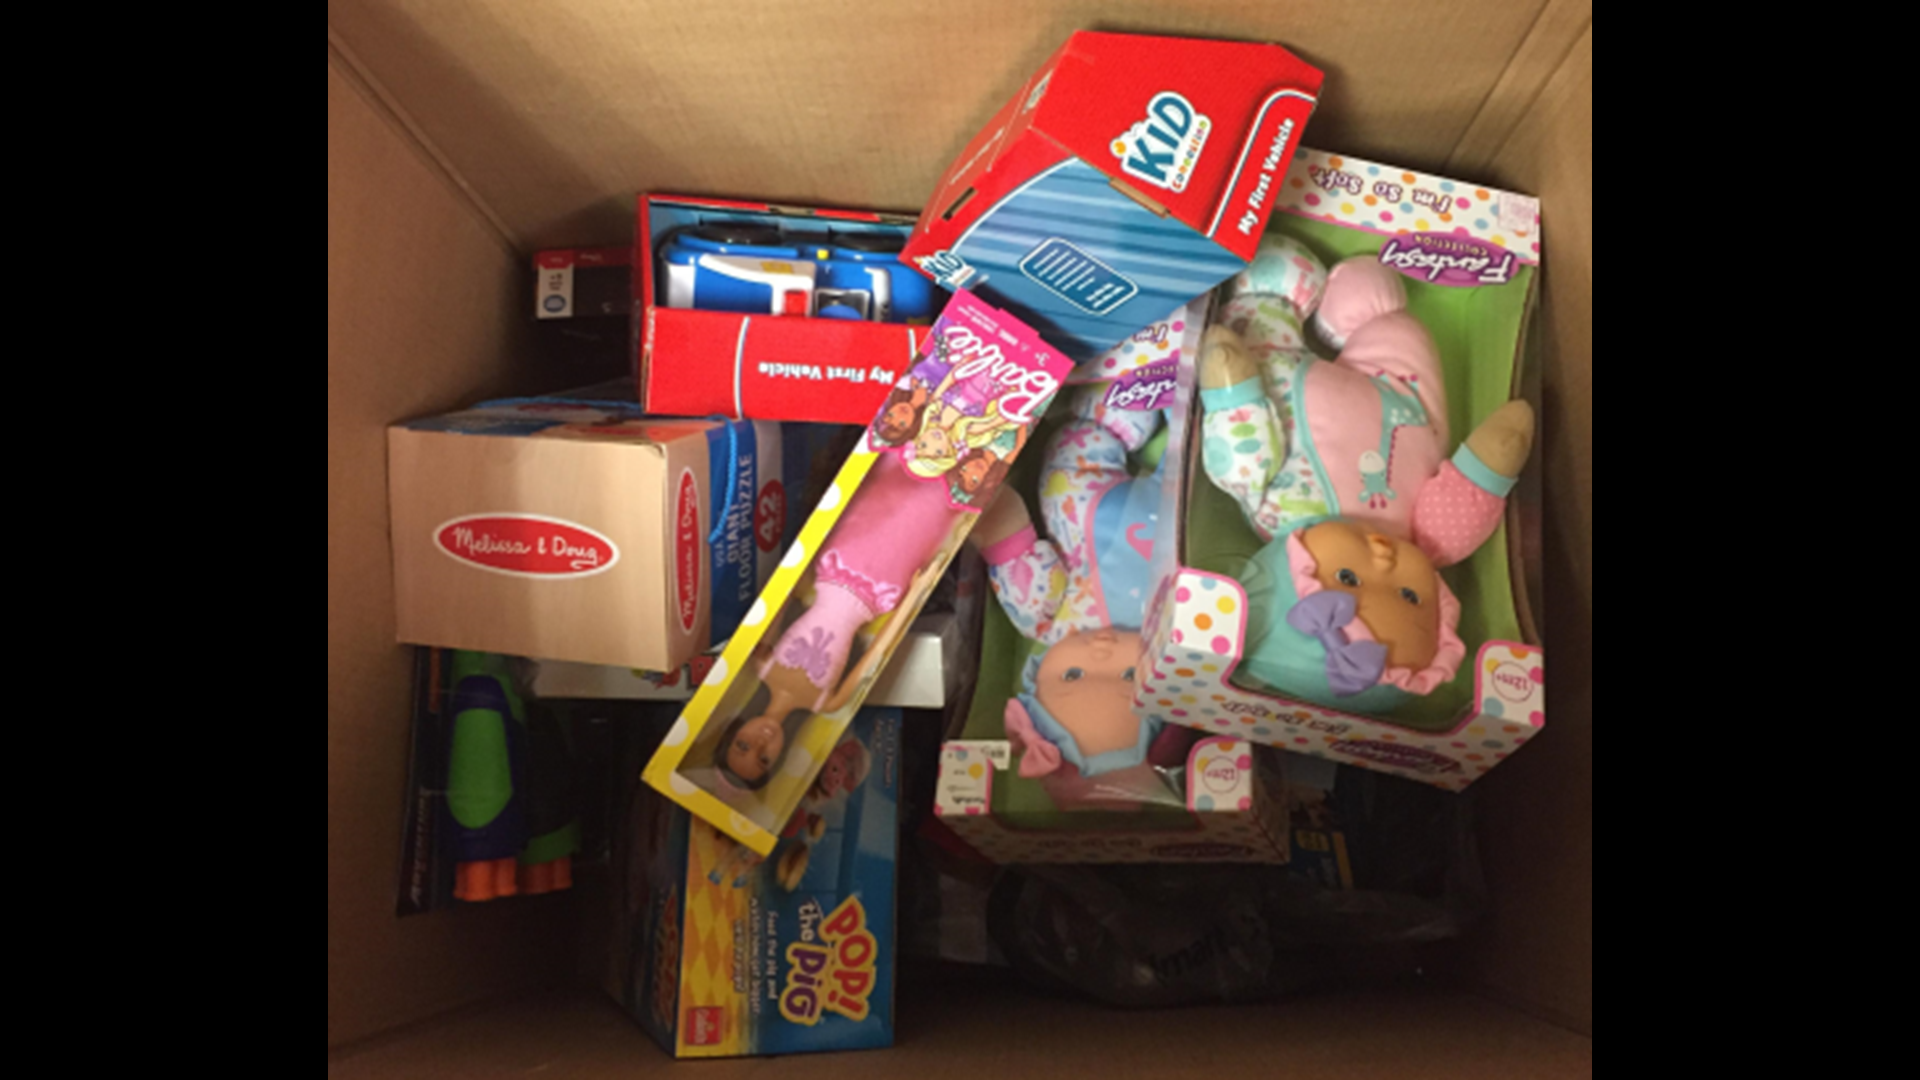 Northwest EMS crews are asking for donations of new & unwrapped toys for children 18 and under